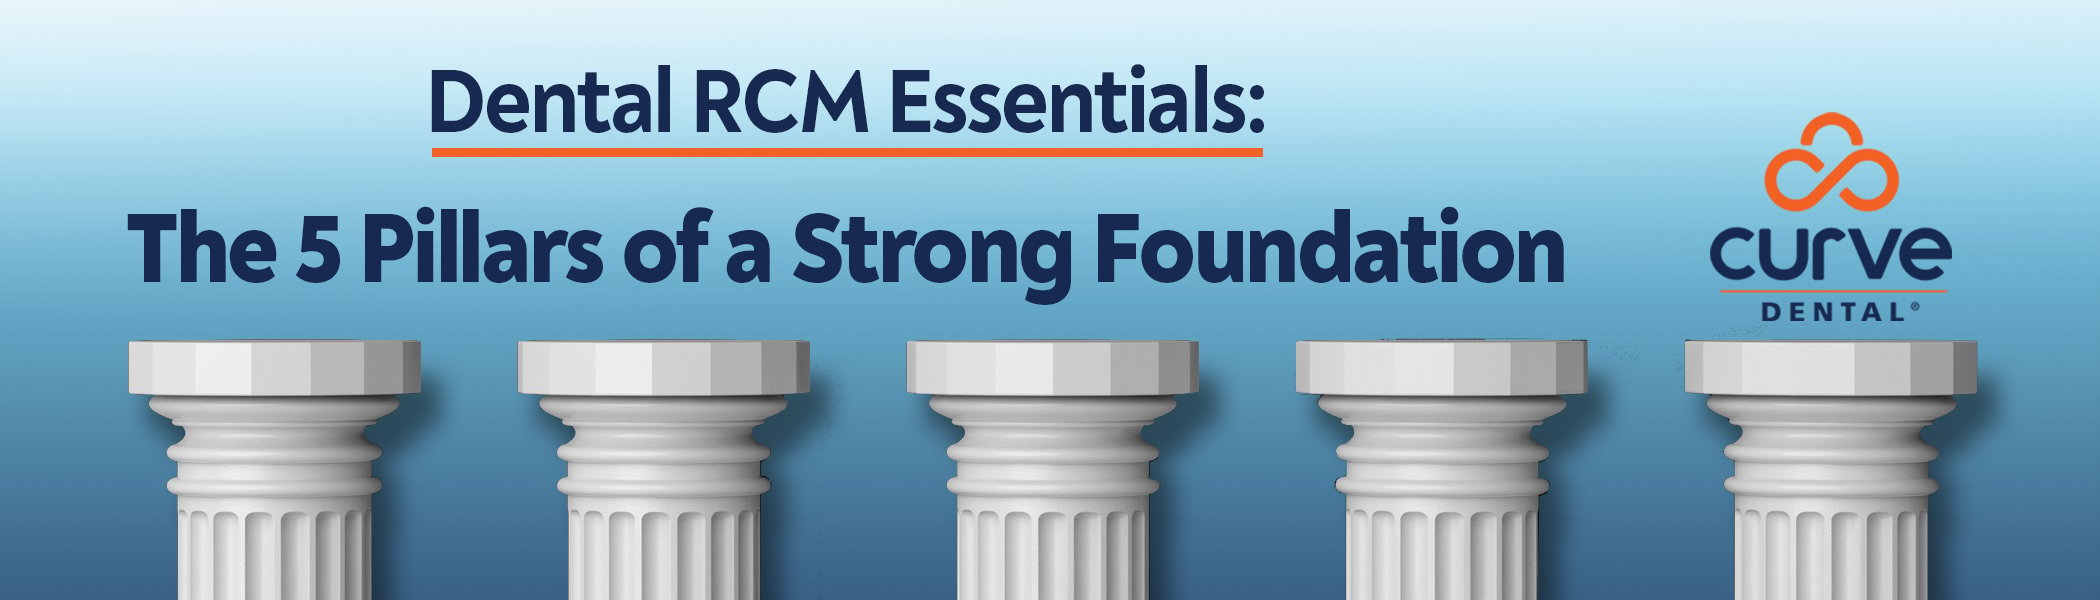 Dental RCM Essentials: The 5 Pillars of a Strong Foundation